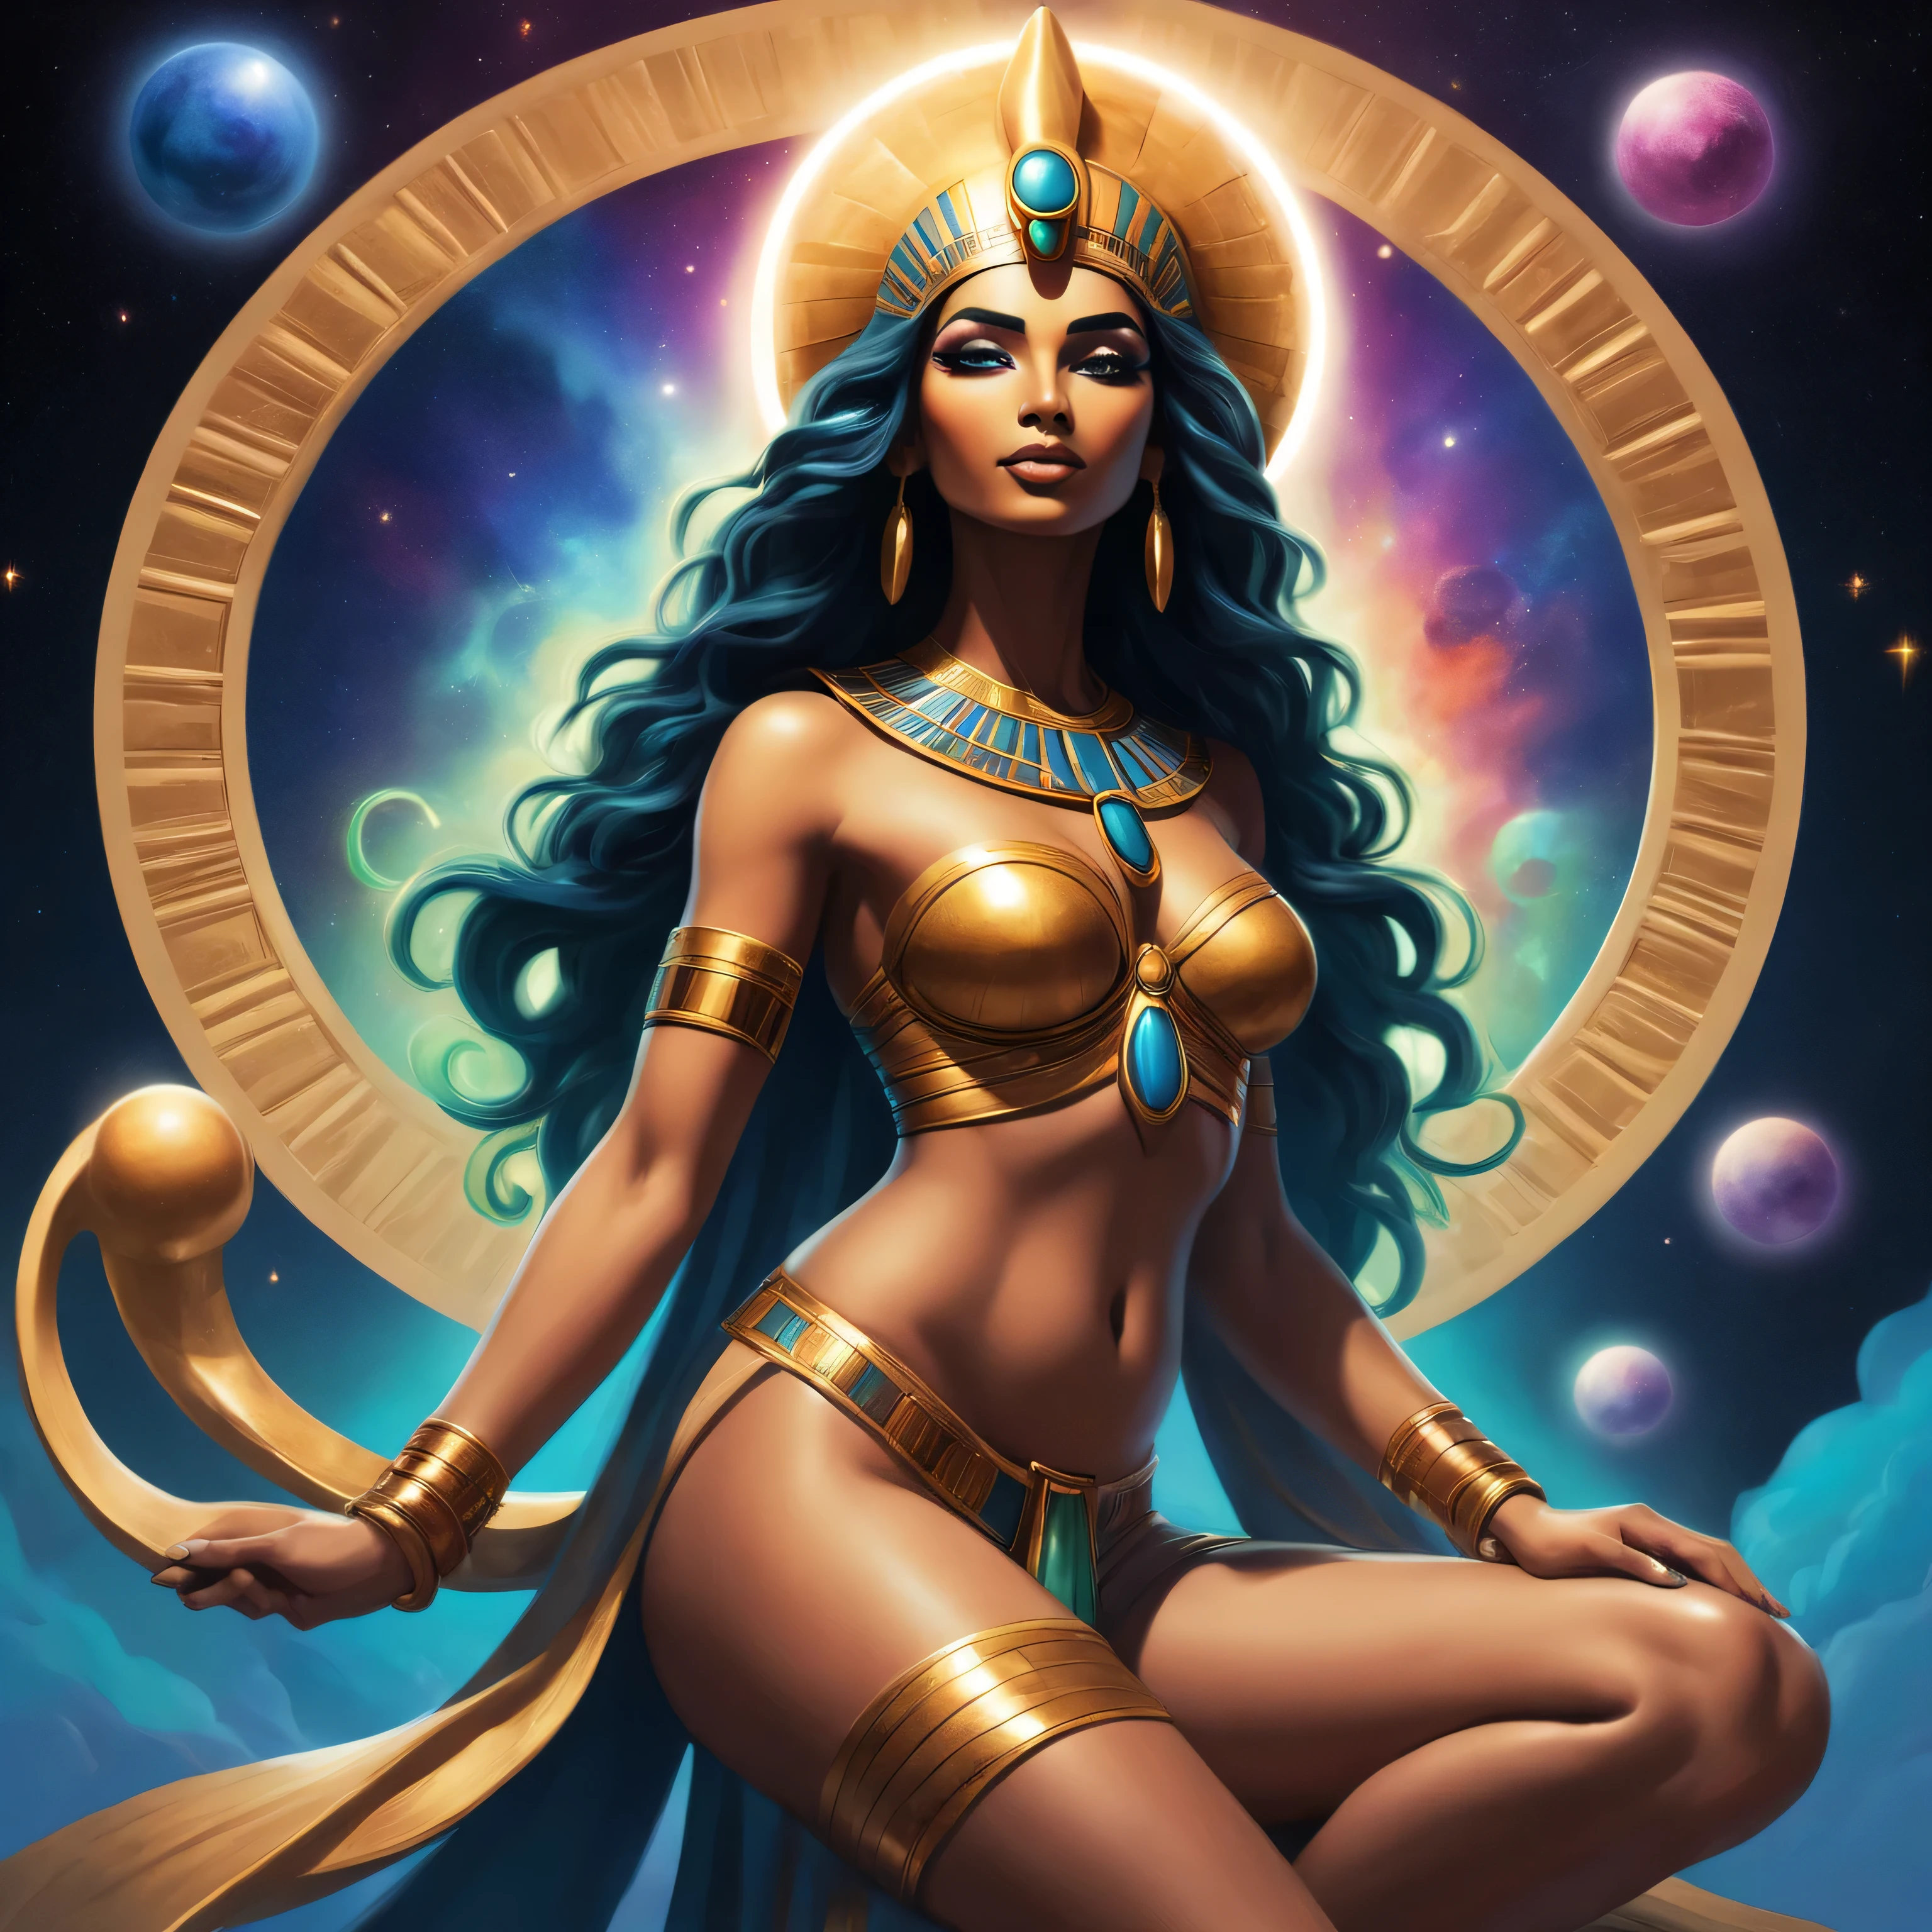 In the Pop Art style, create a vibrant and energetic depiction of the Egyptian goddess Nut. Her body is elongated and her limbs stretched to infinity, embodying the concept of the infinite universe. Her continual birthing and dying creates a luminous aura, casting a soft glow around her. Use Anime and Comic Book elements to add exaggerated expressions and dynamic movements, enhancing her goddess powers. Applying the Bioluminescent style, incorporate glowing elements throughout her body and the surrounding cosmos descending from the birthing and dying goddess, creating a mesmerizing and otherworldly presence.